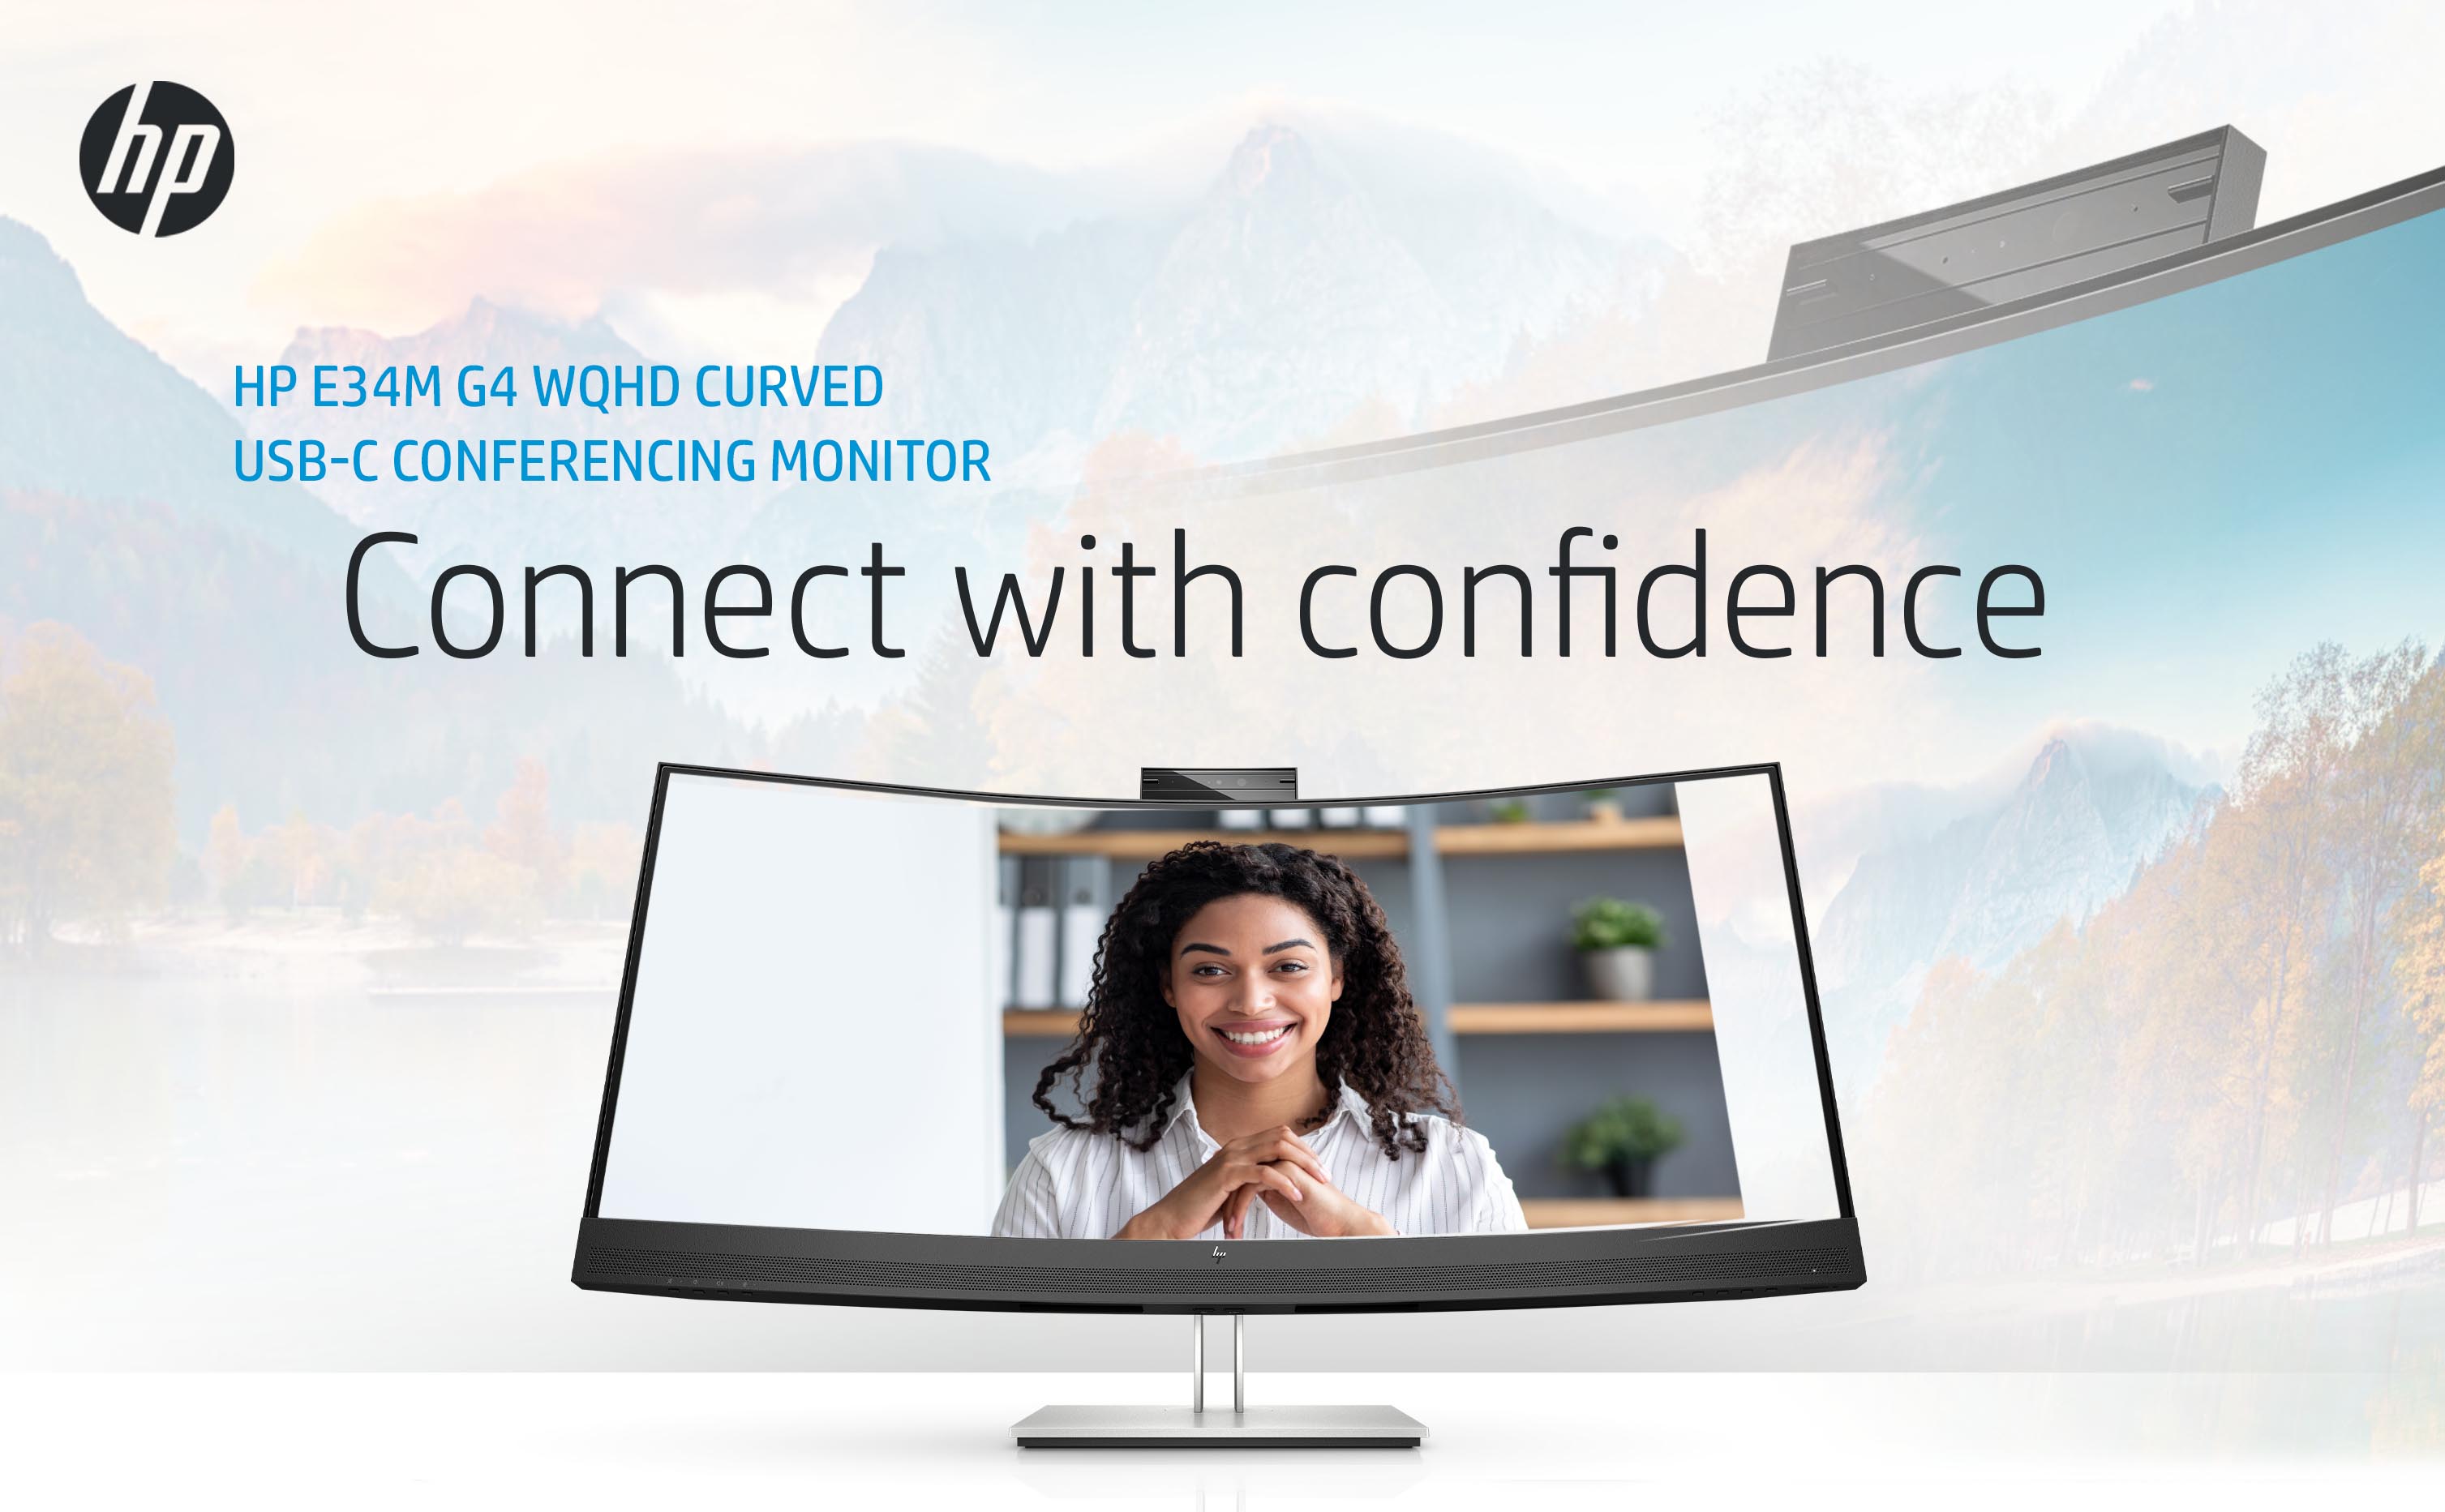 HP E34m G4 WQHD Curved USB-C Conferencing Monitor